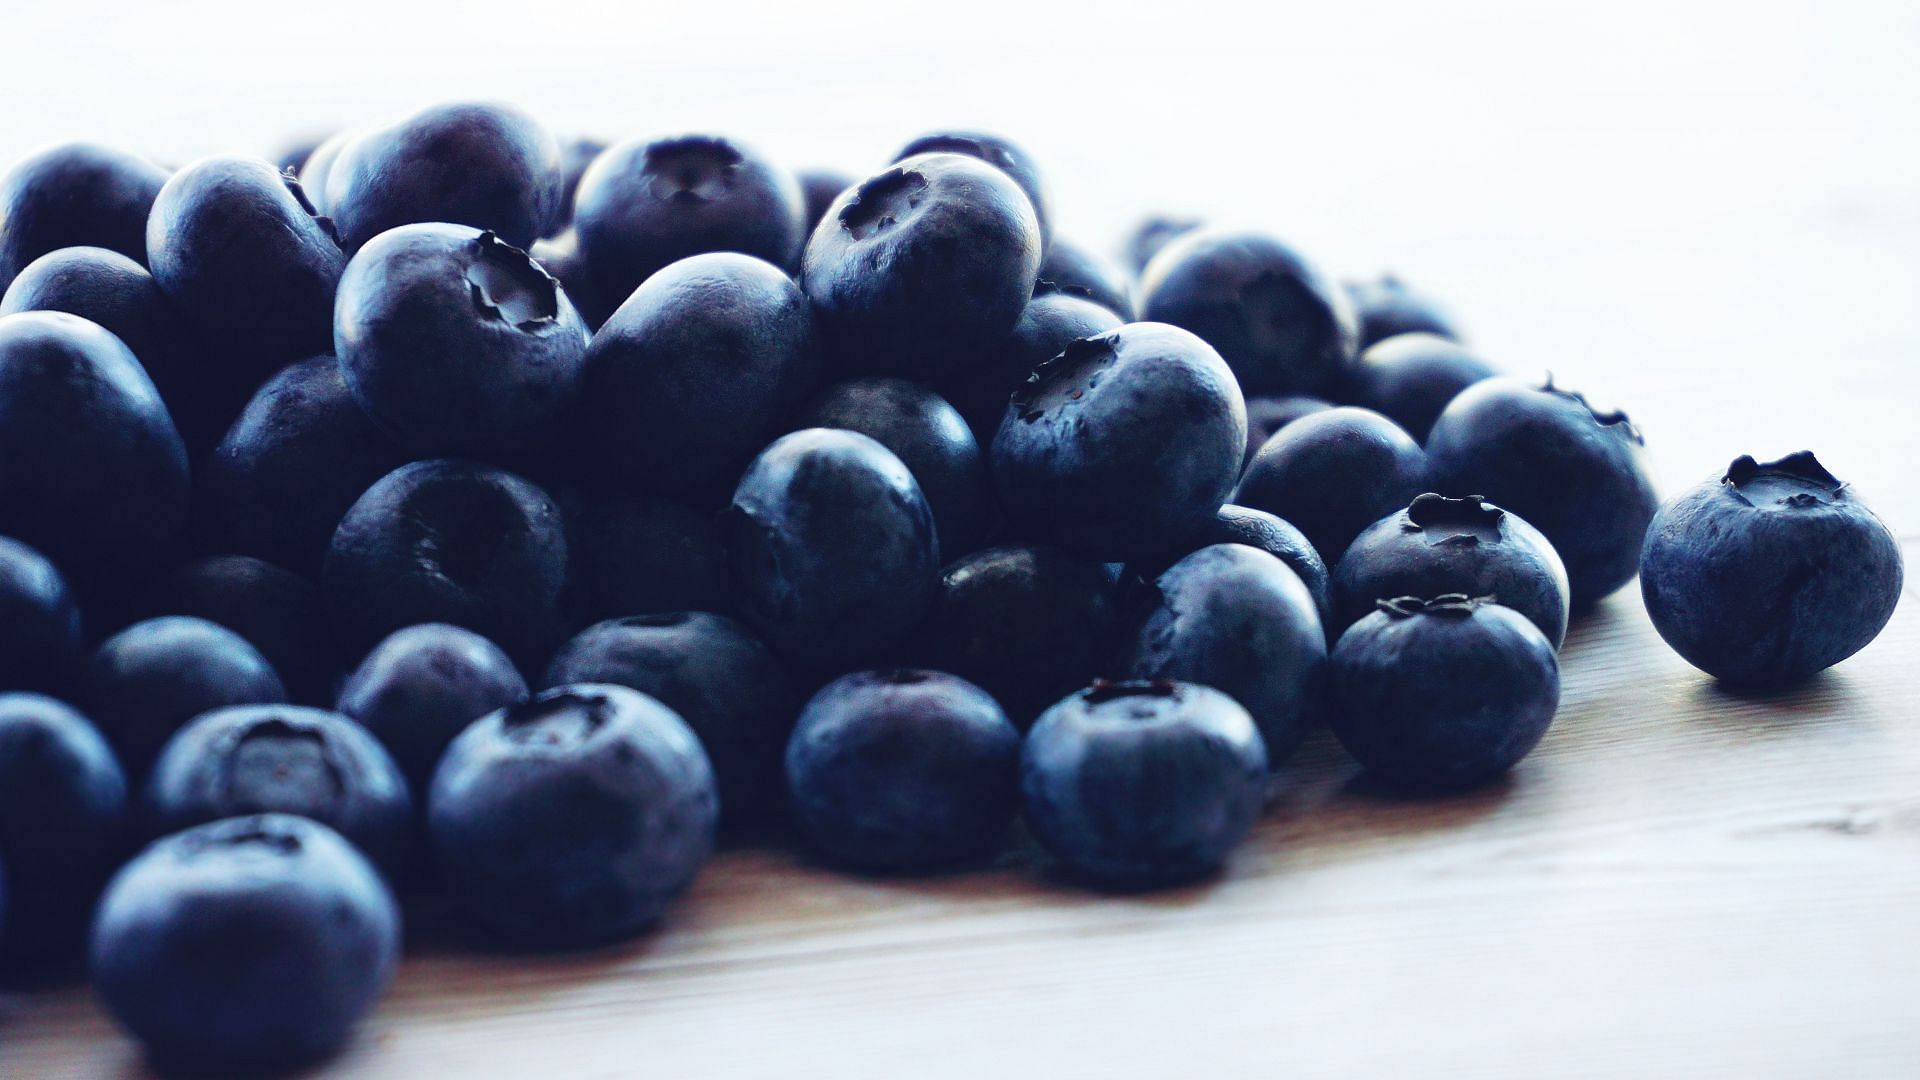 Blueberries are packed with antioxidants. (Image via Pexels/ Suzy Hazelwood)